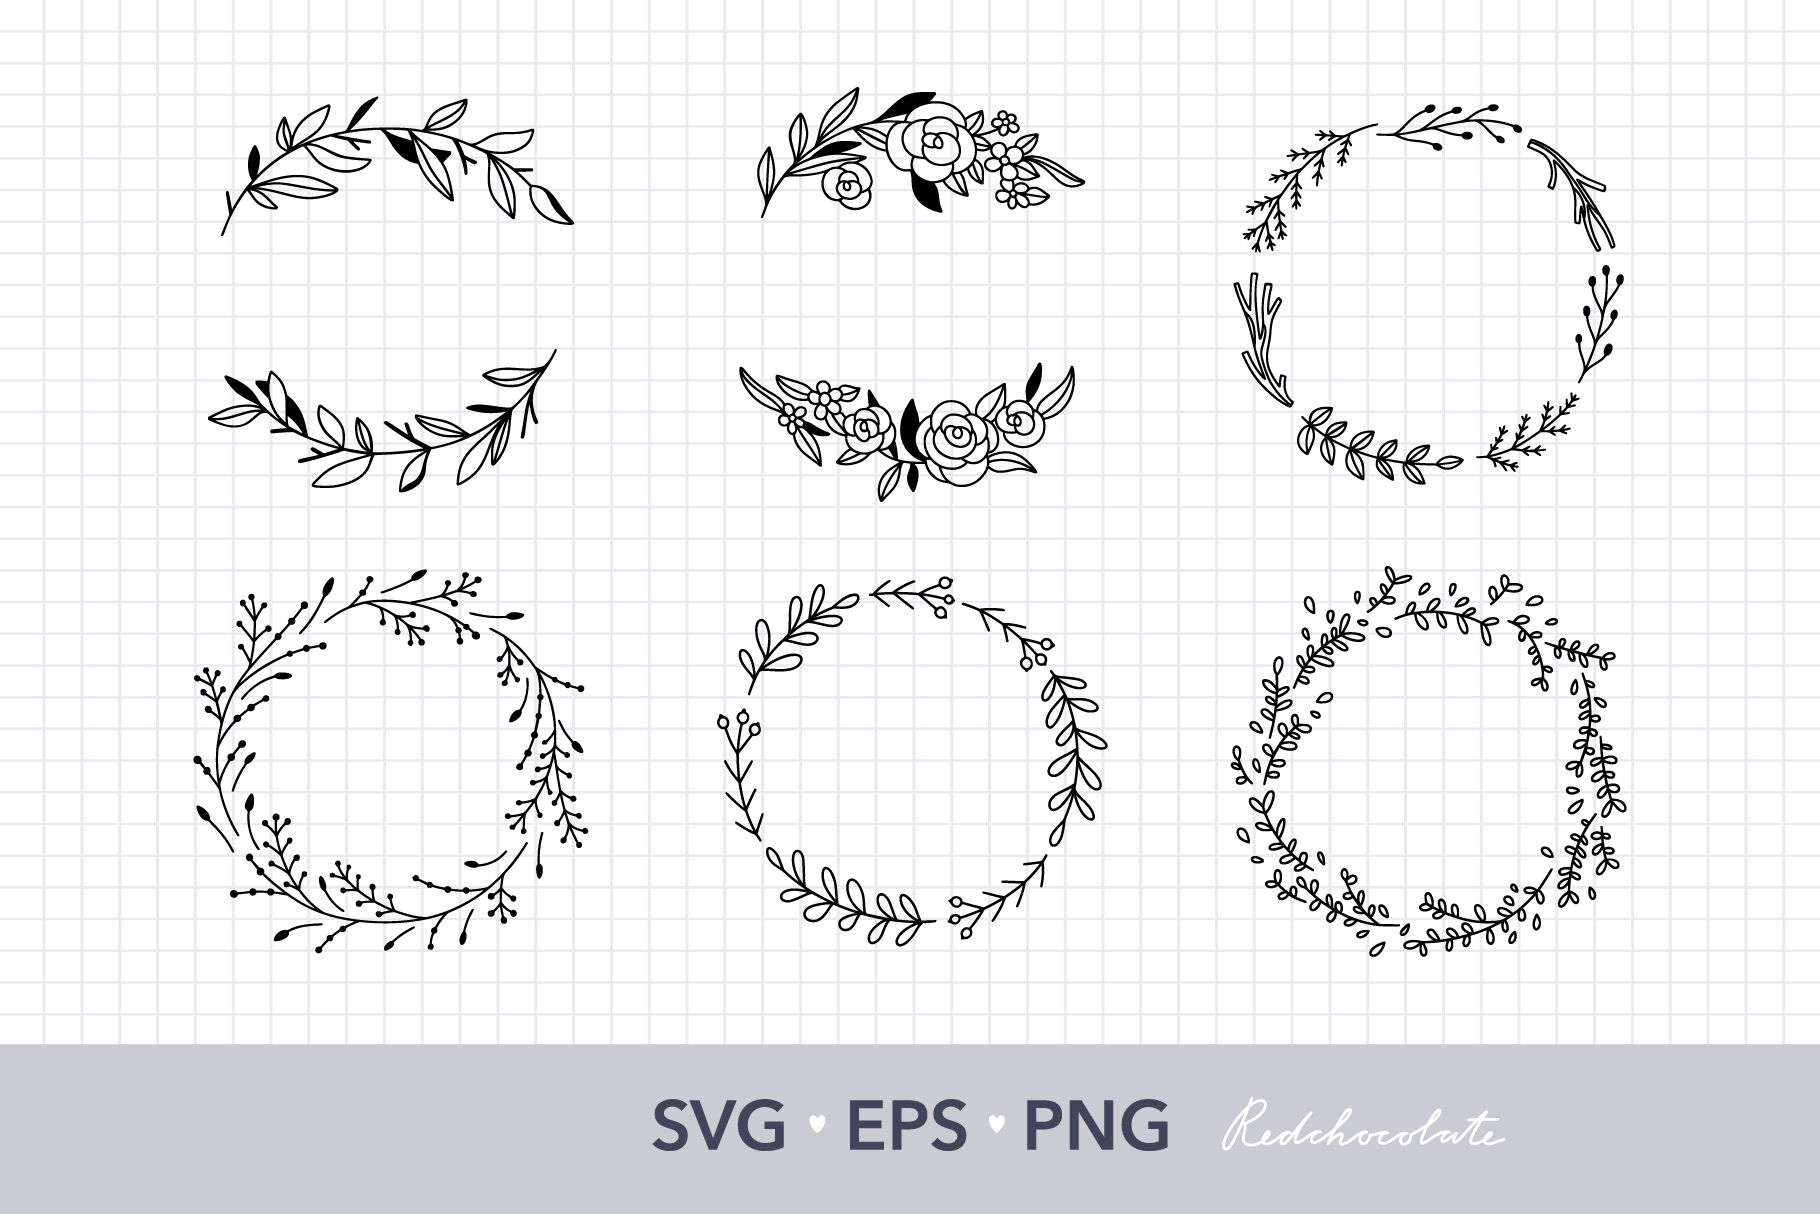 Floral wreath SVG clipart set. Hand drawn wreath clipart collection By